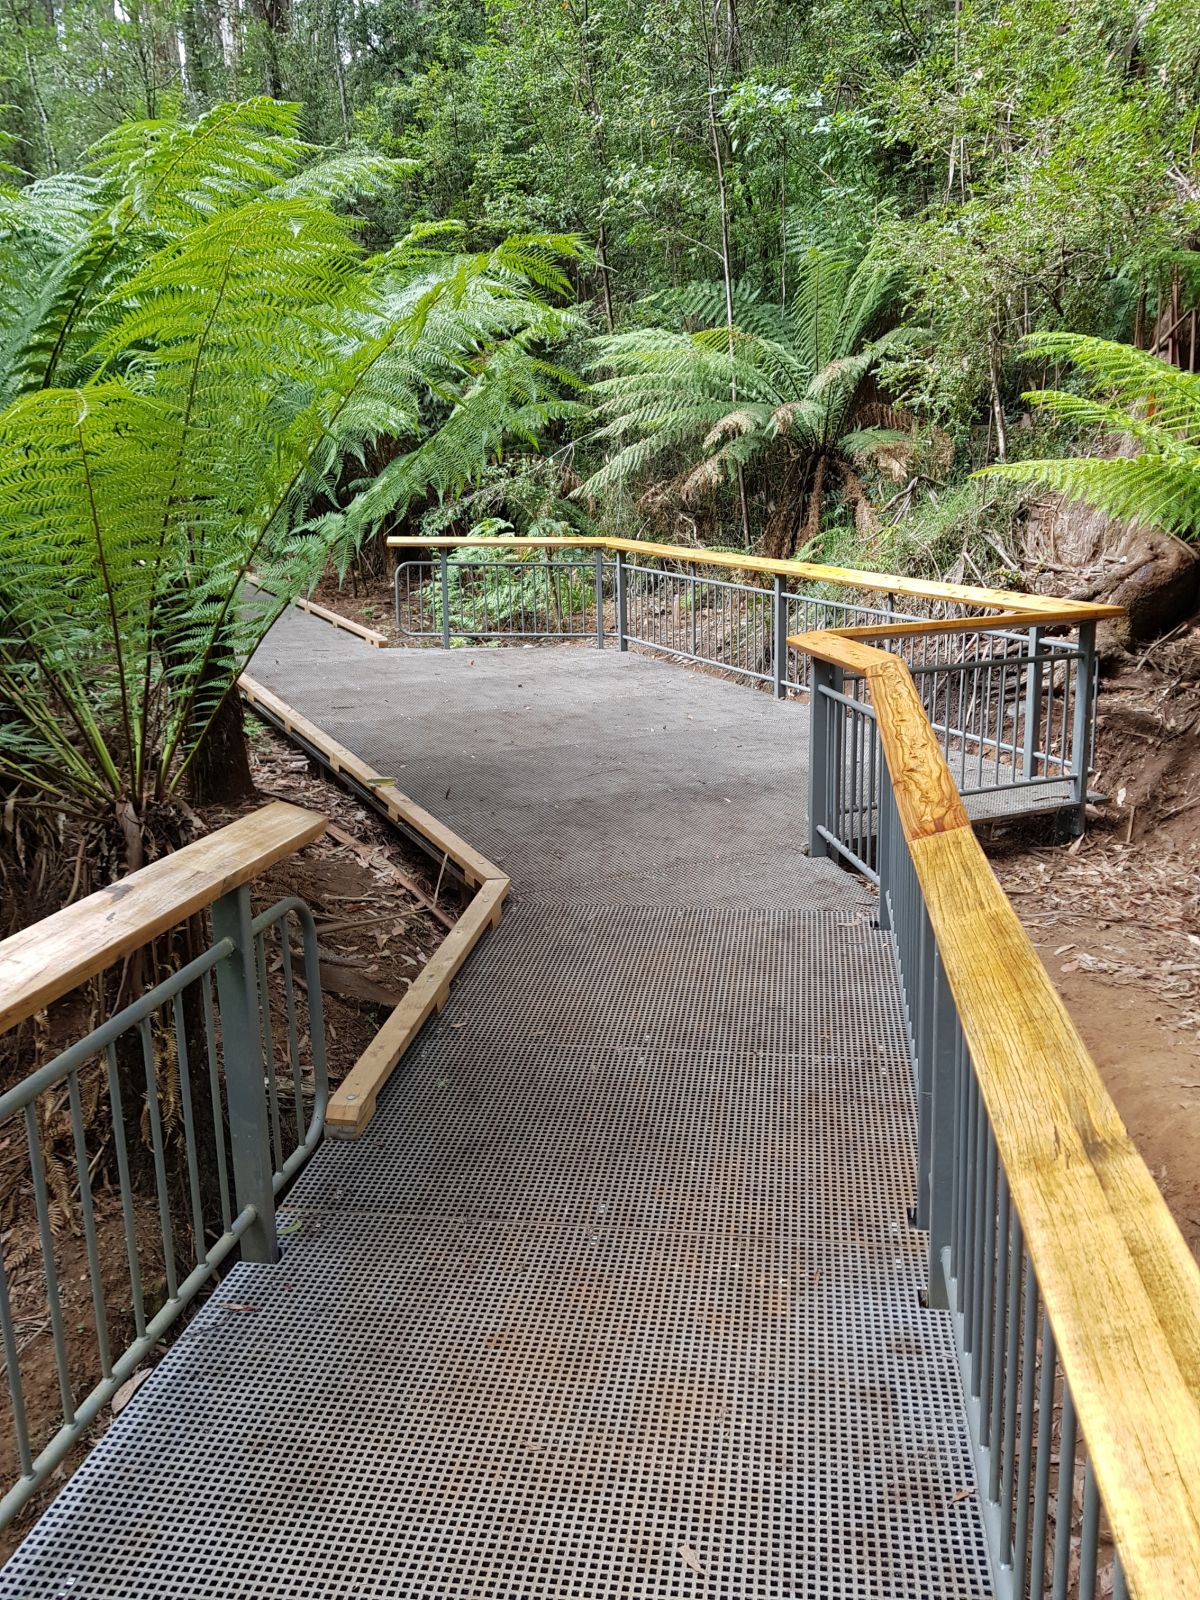 A viewing platform connected to a boardwalk in the rainforest.